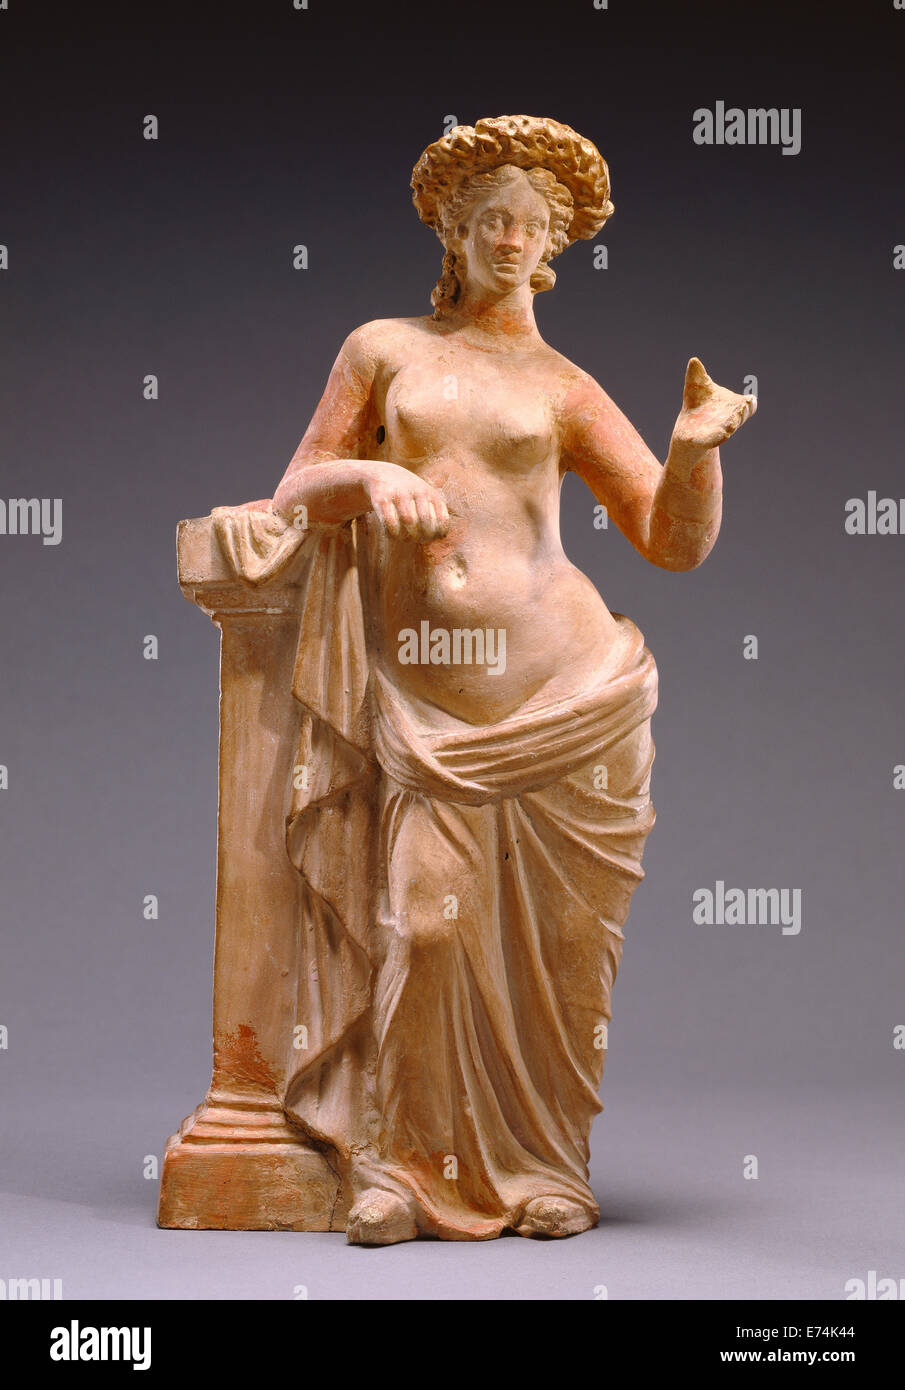 Statuette of Aphrodite Leaning on a Pillar; Unknown; Tanagra, Greece, Europe; 250 - 200 B.C.; Terracotta with polychromy; Object Stock Photo